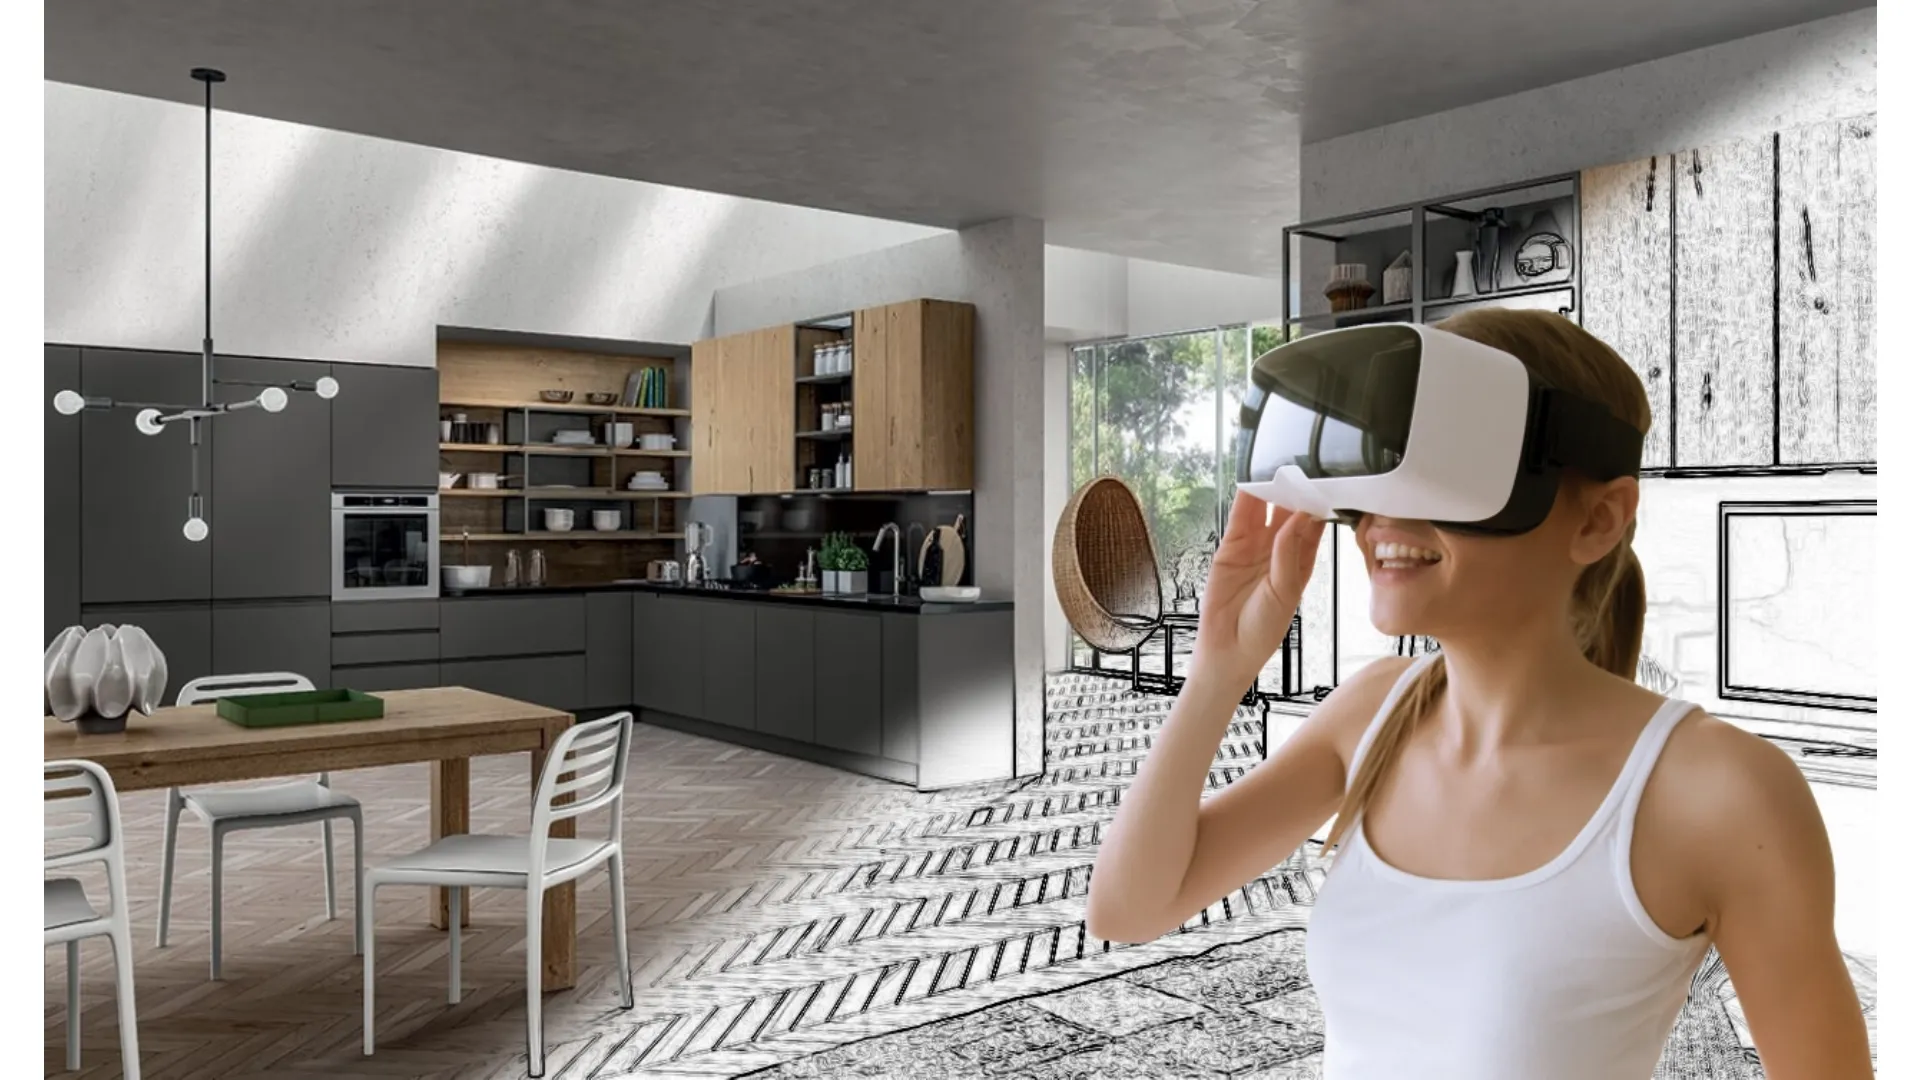 Live your decor before you even realize it thanks to VIRTUAL REALITY